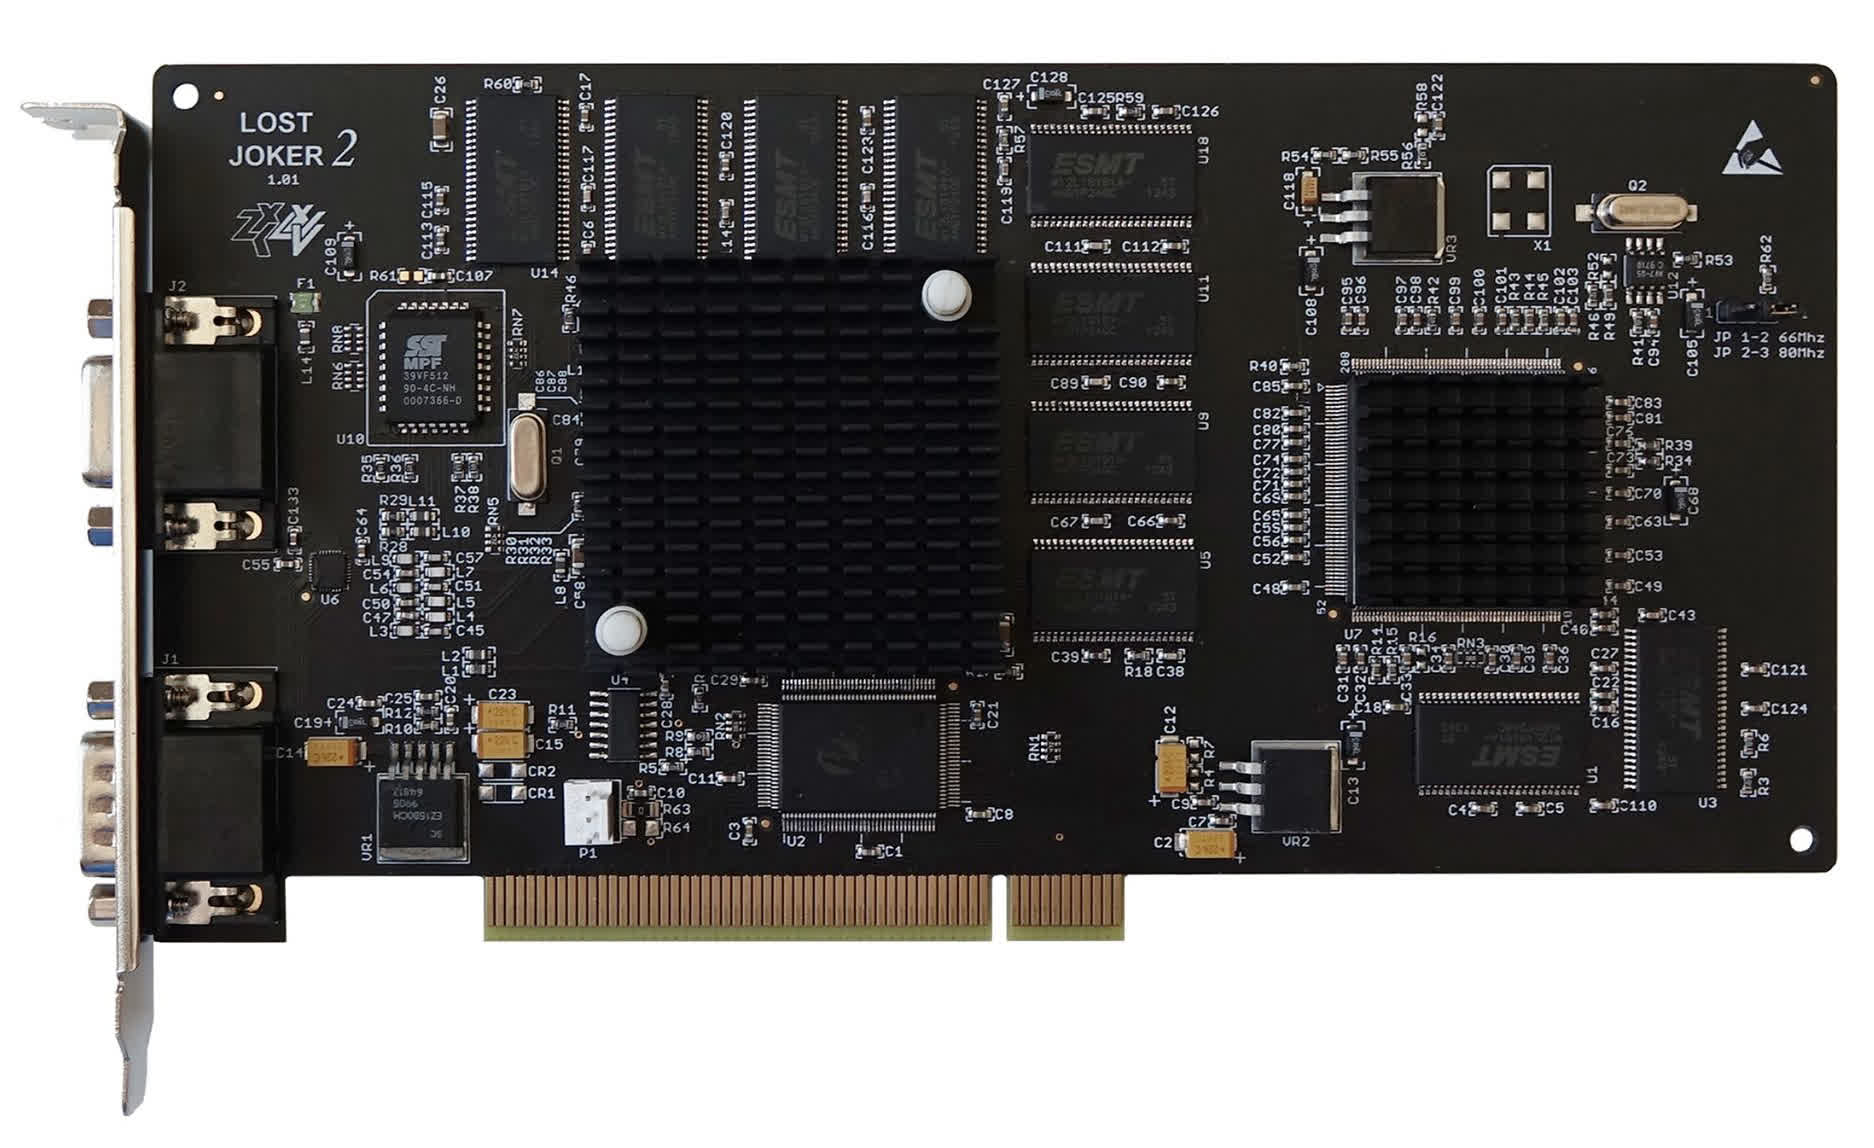 This enthusiast-made retro graphics card features a Voodoo 3 and PowerVR GPU on a single board